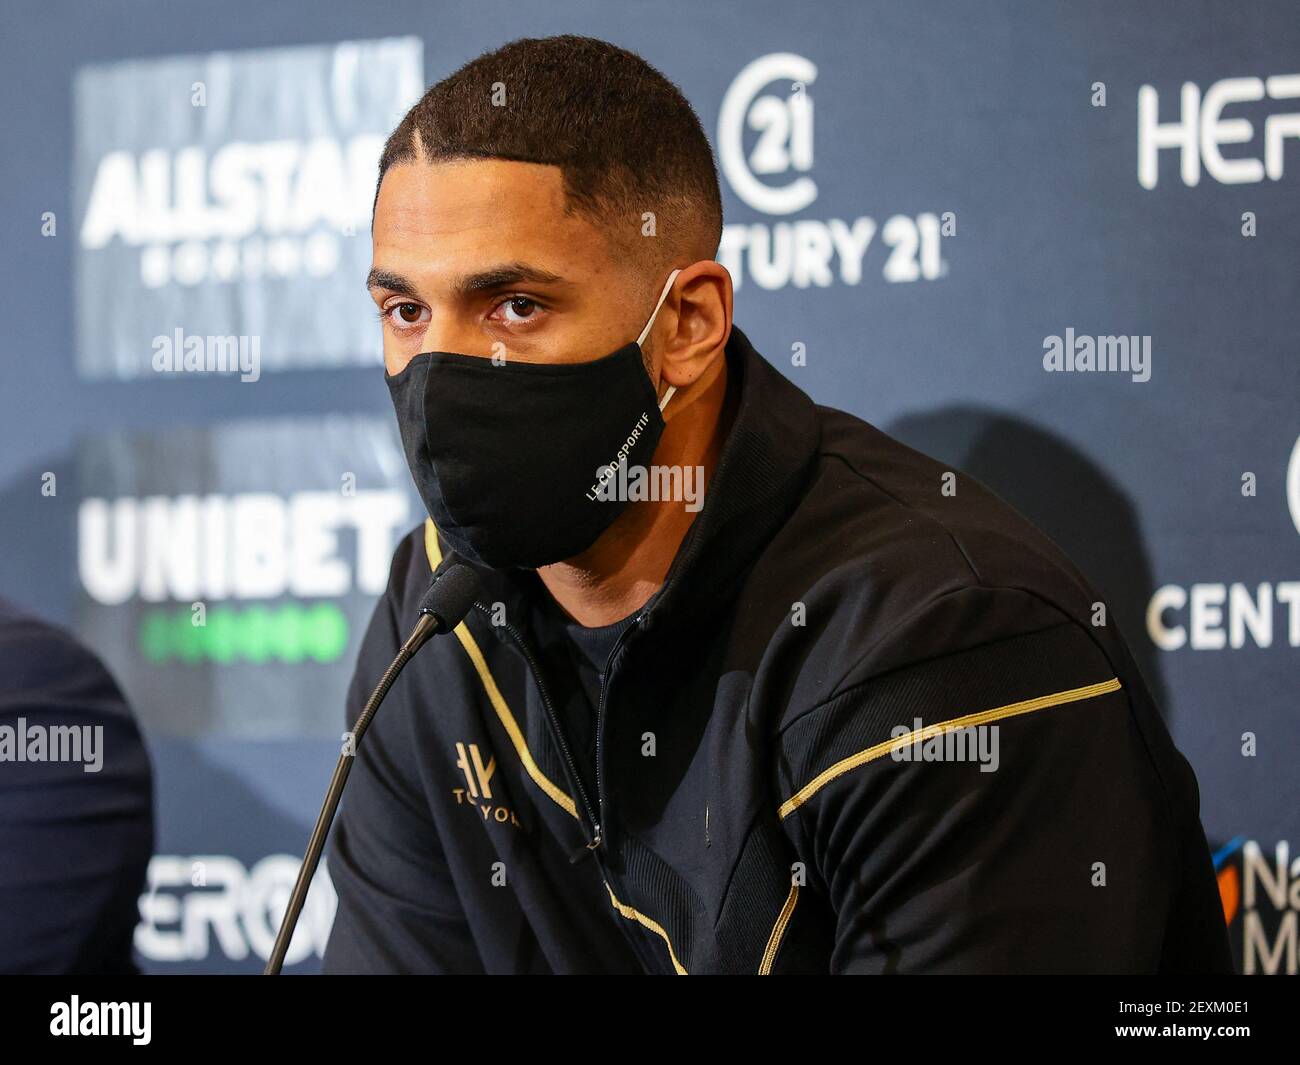 Nantes, France. 04th Mar, 2021. French boxer Tony Yoka speaks during the  official weigh-in in Nantes, western France, on the eve of a boxing match  at the Heavyweight European Union Championships on